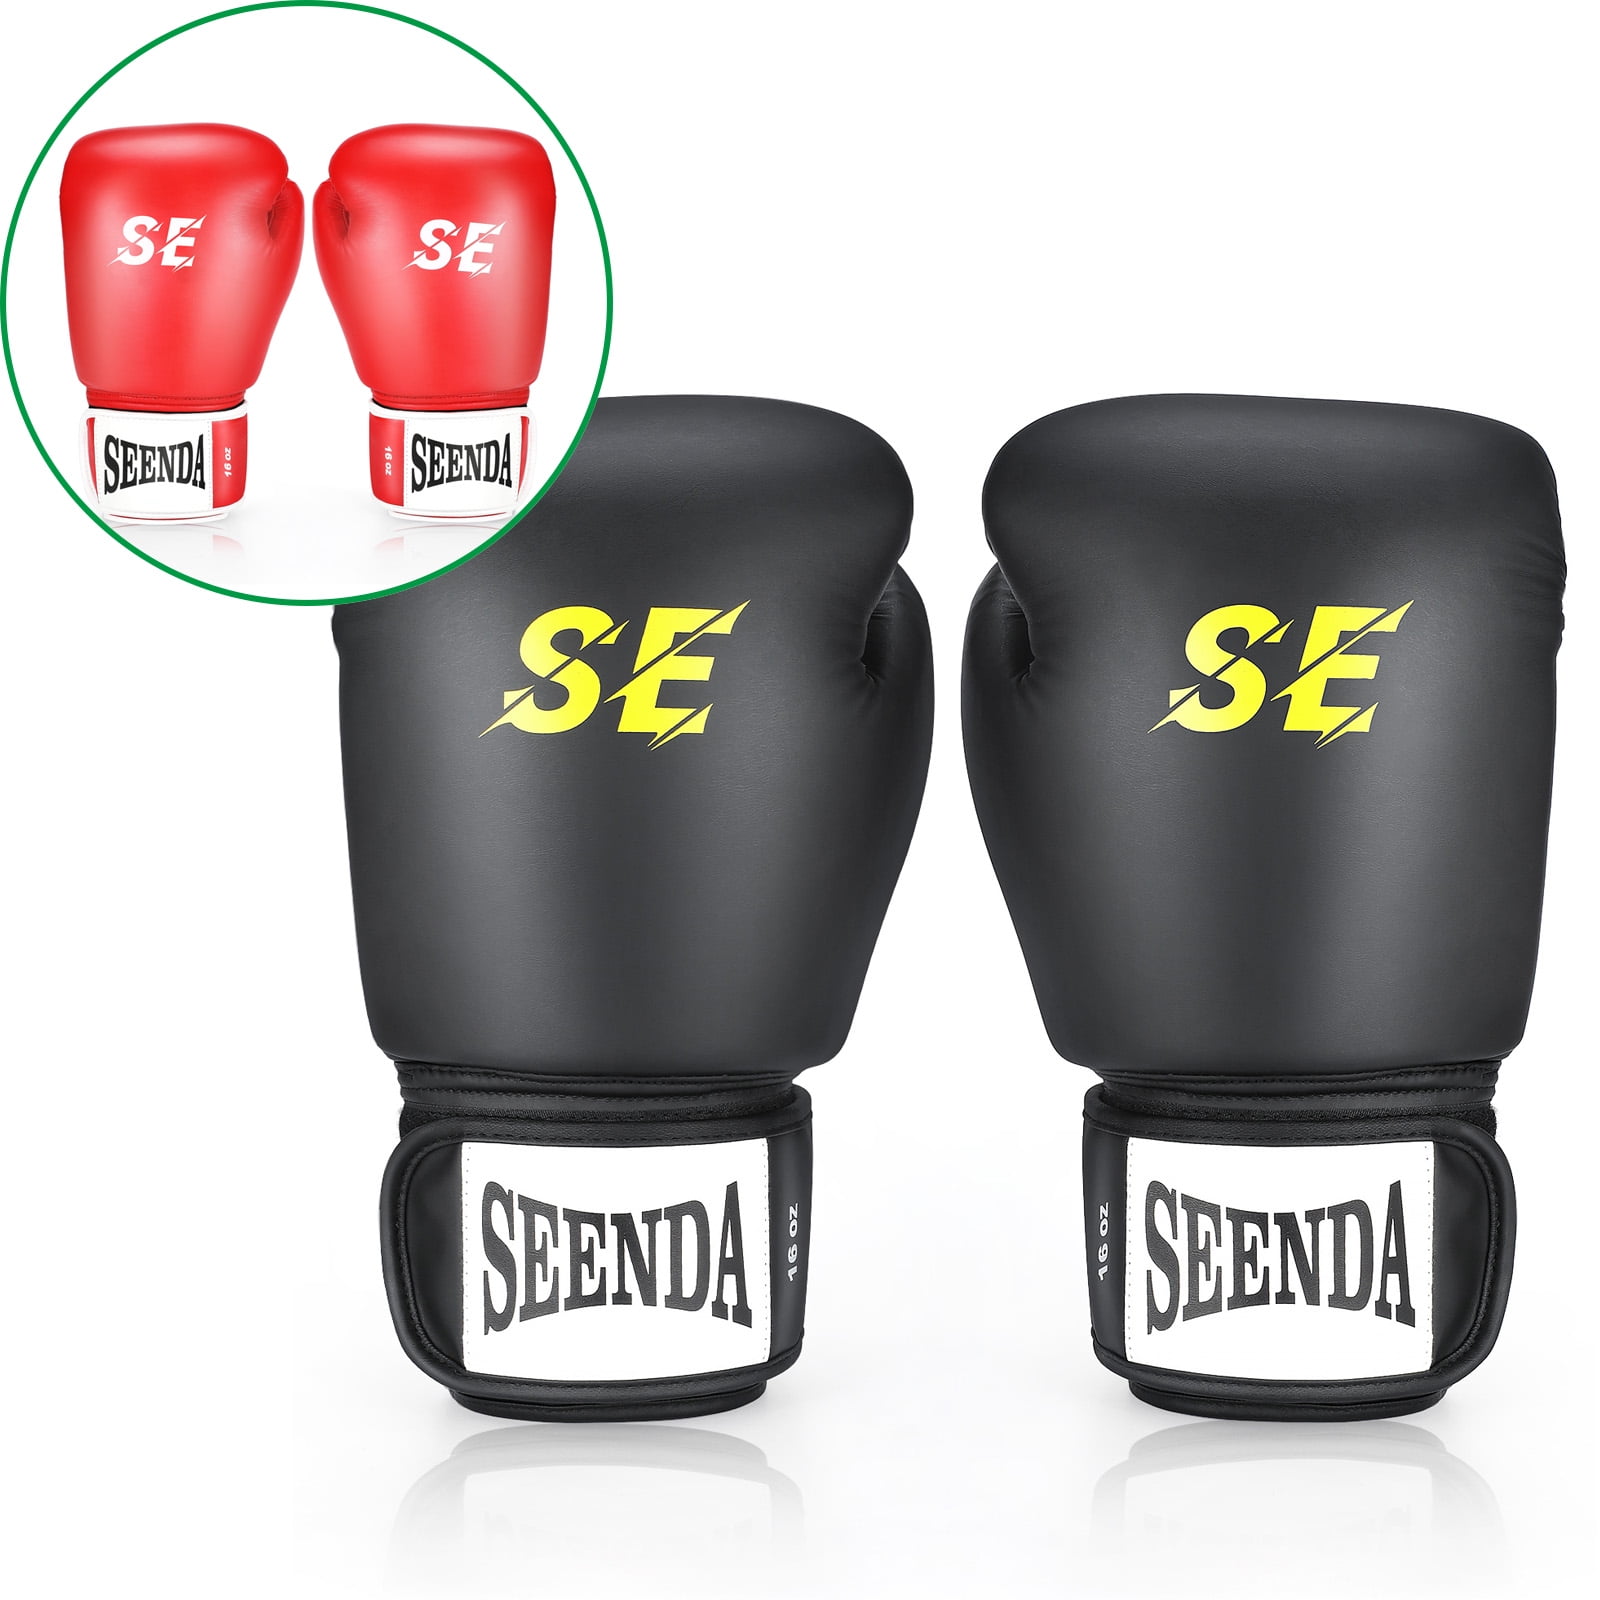 Boxing Gloves Sparring Punch Bag Gym Training Fight MMA Muay Thai Kickboxing UK 